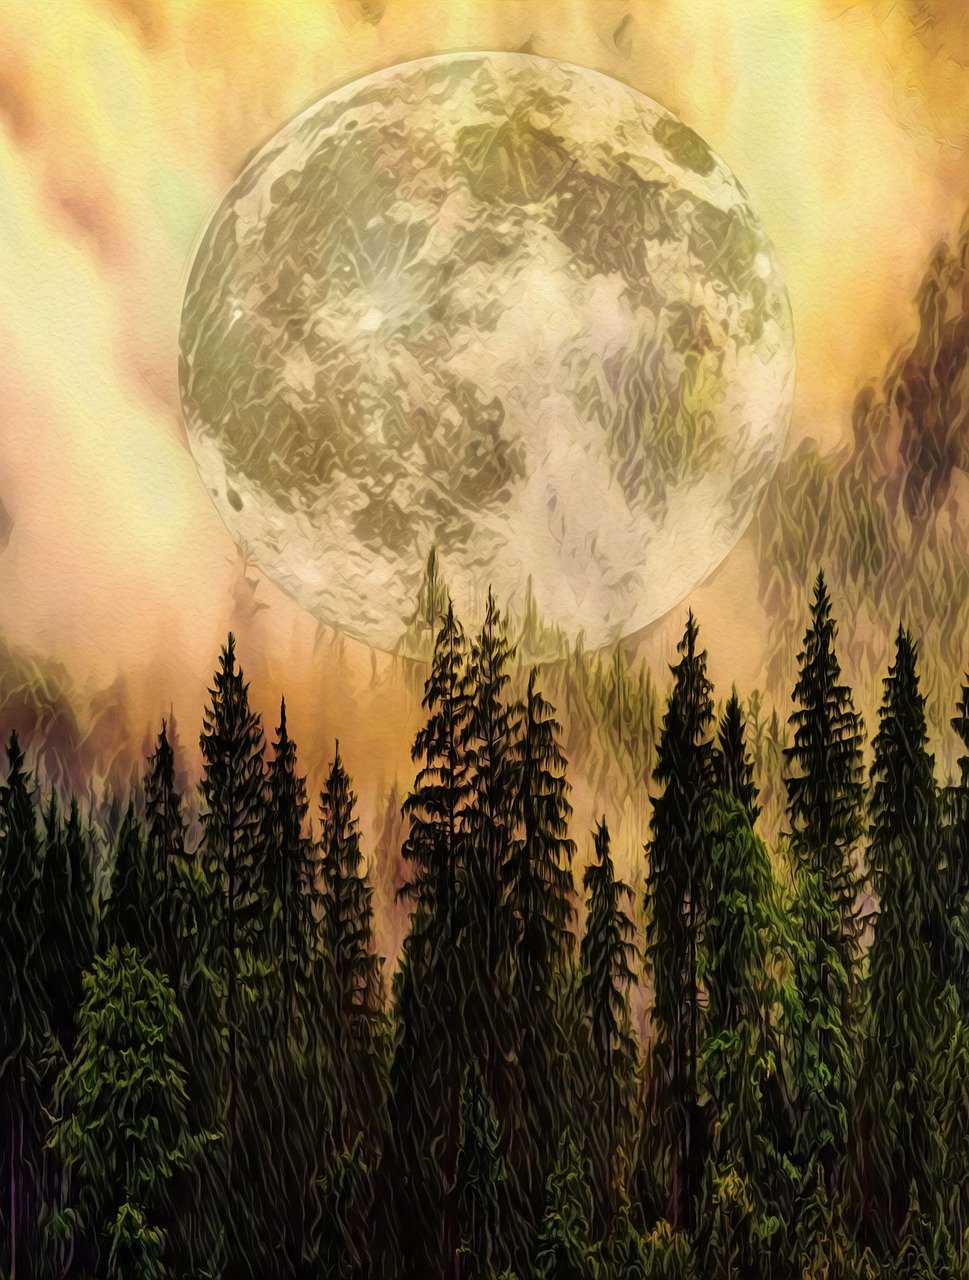 a painting of a full moon with trees in the foreground, a digital painting, metaphysical painting, fir forest, with a yellow green smog sky, in style of digital painting, forest fire